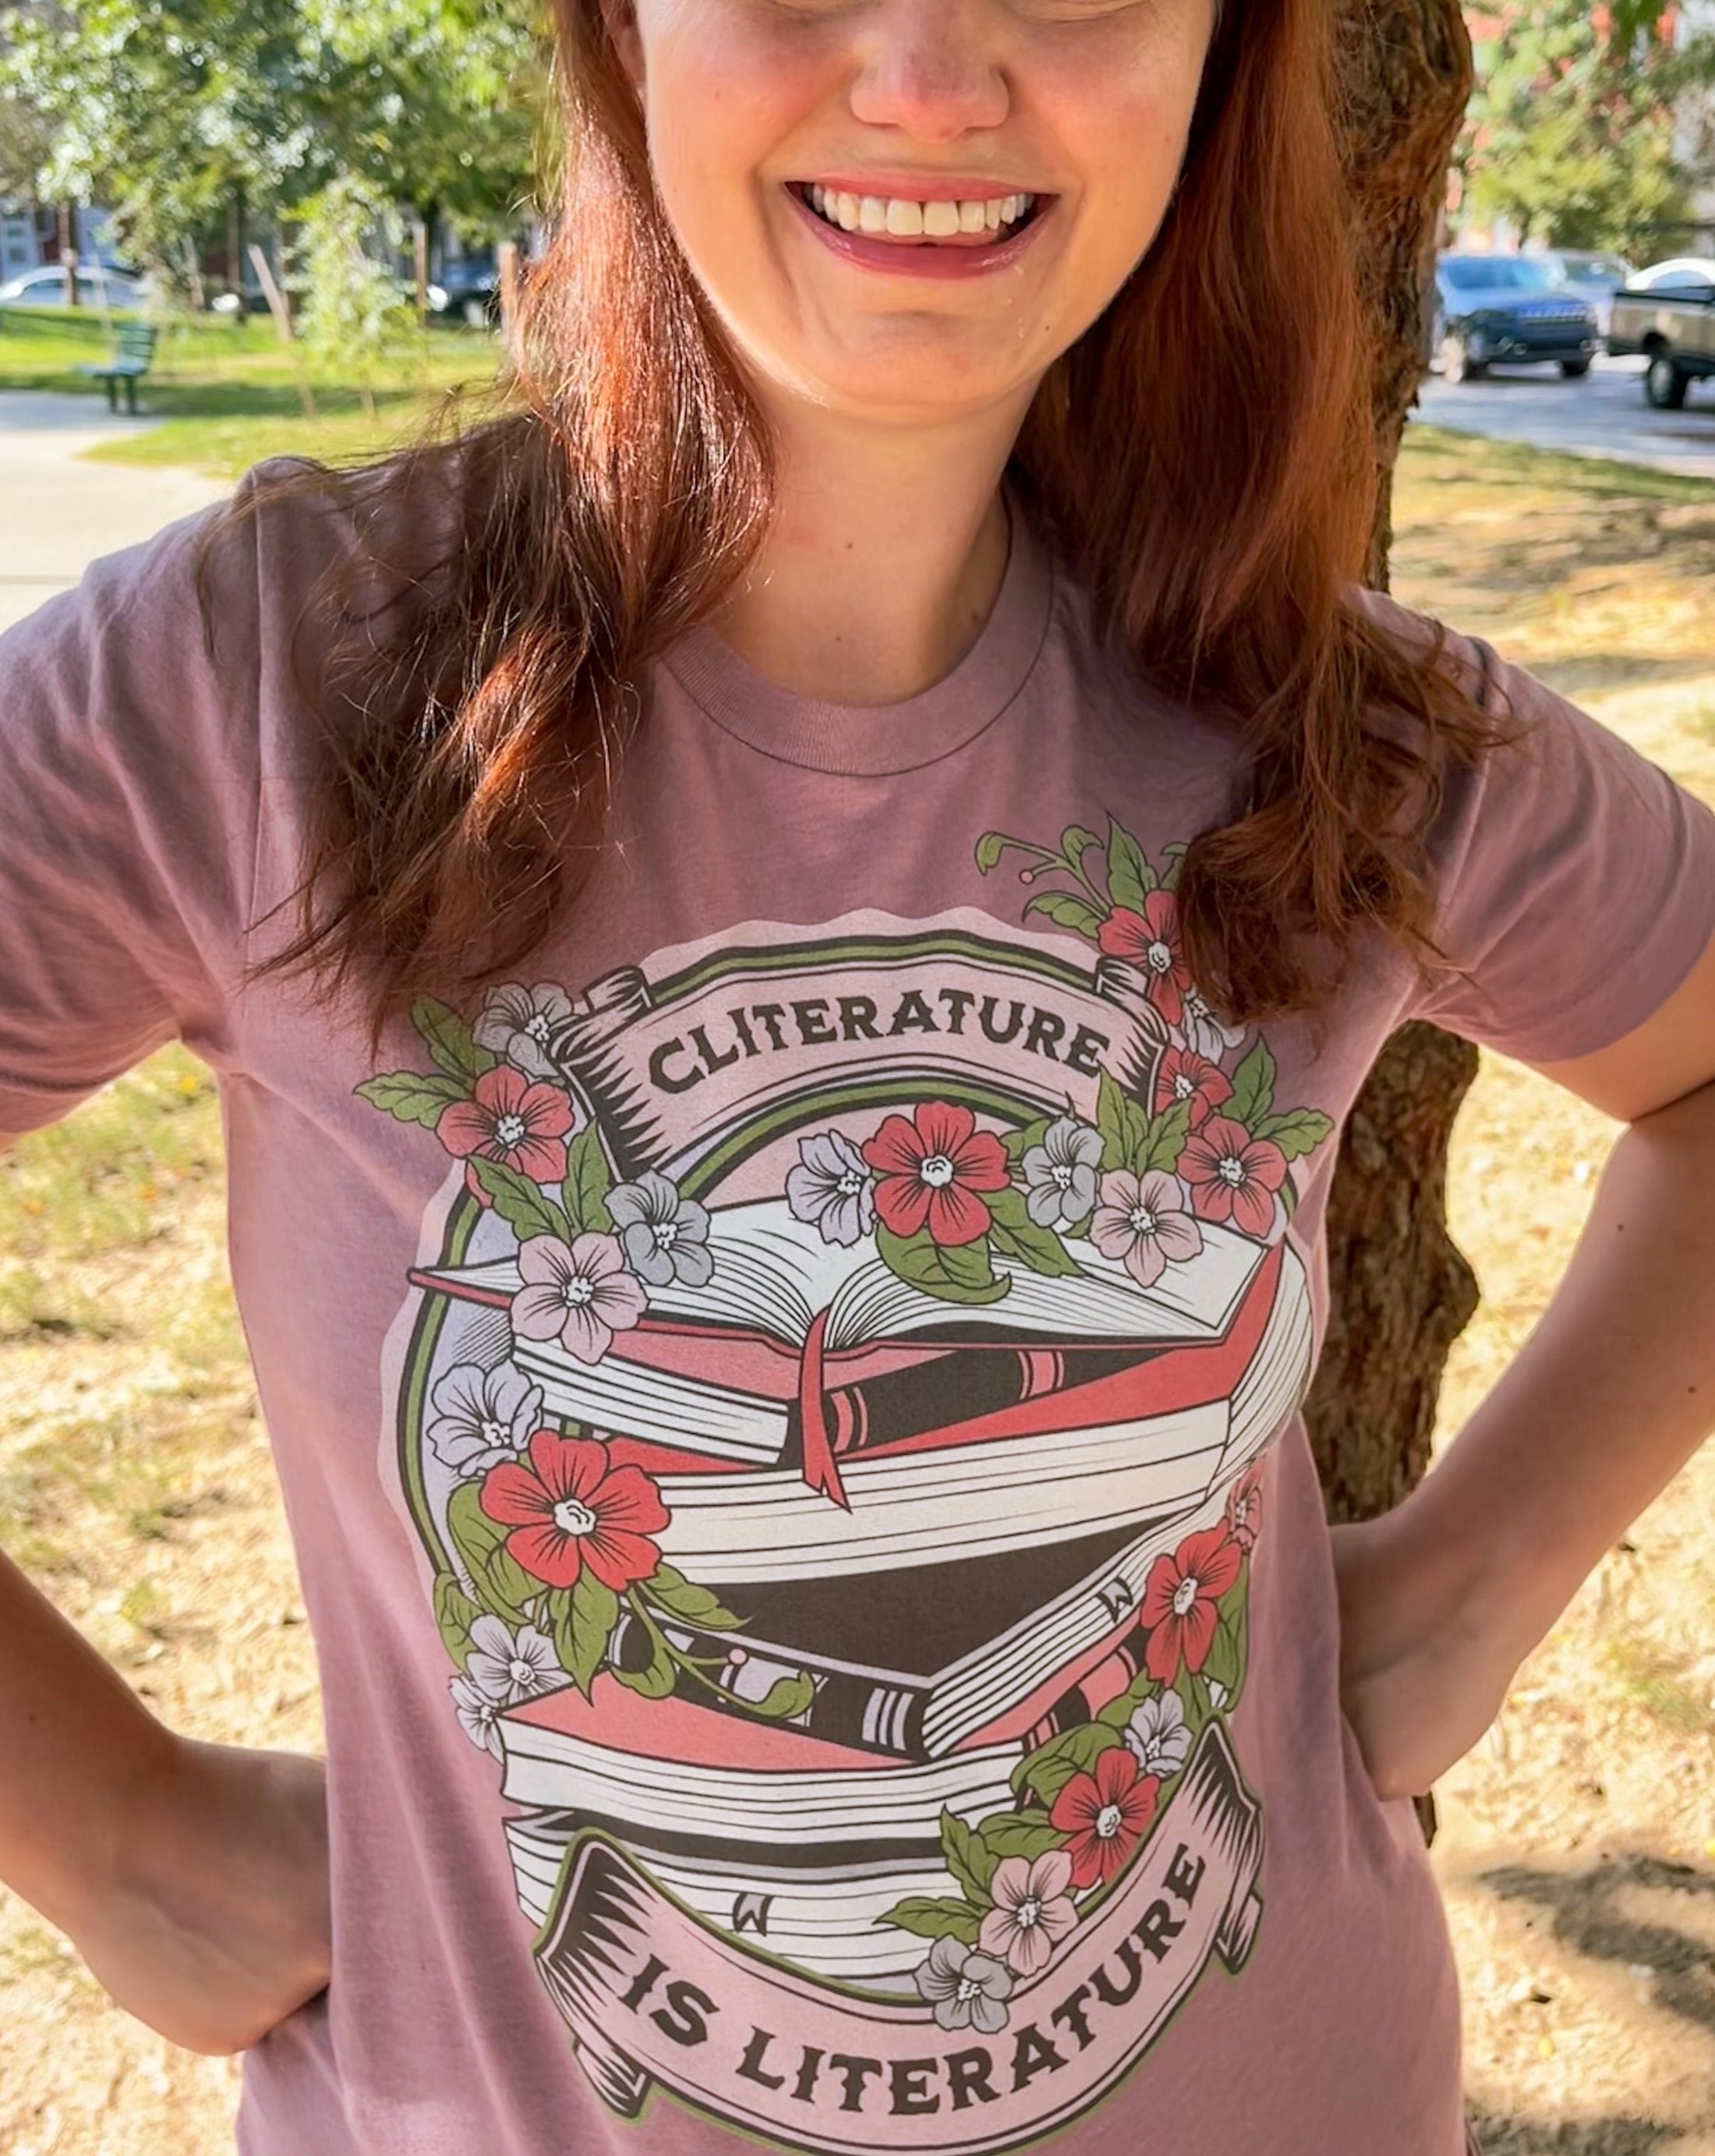 Cliterature is Literature Spring Bookstack Unisex t-shirt  for Fire Drake Artistry Photo by @jessielovenelit